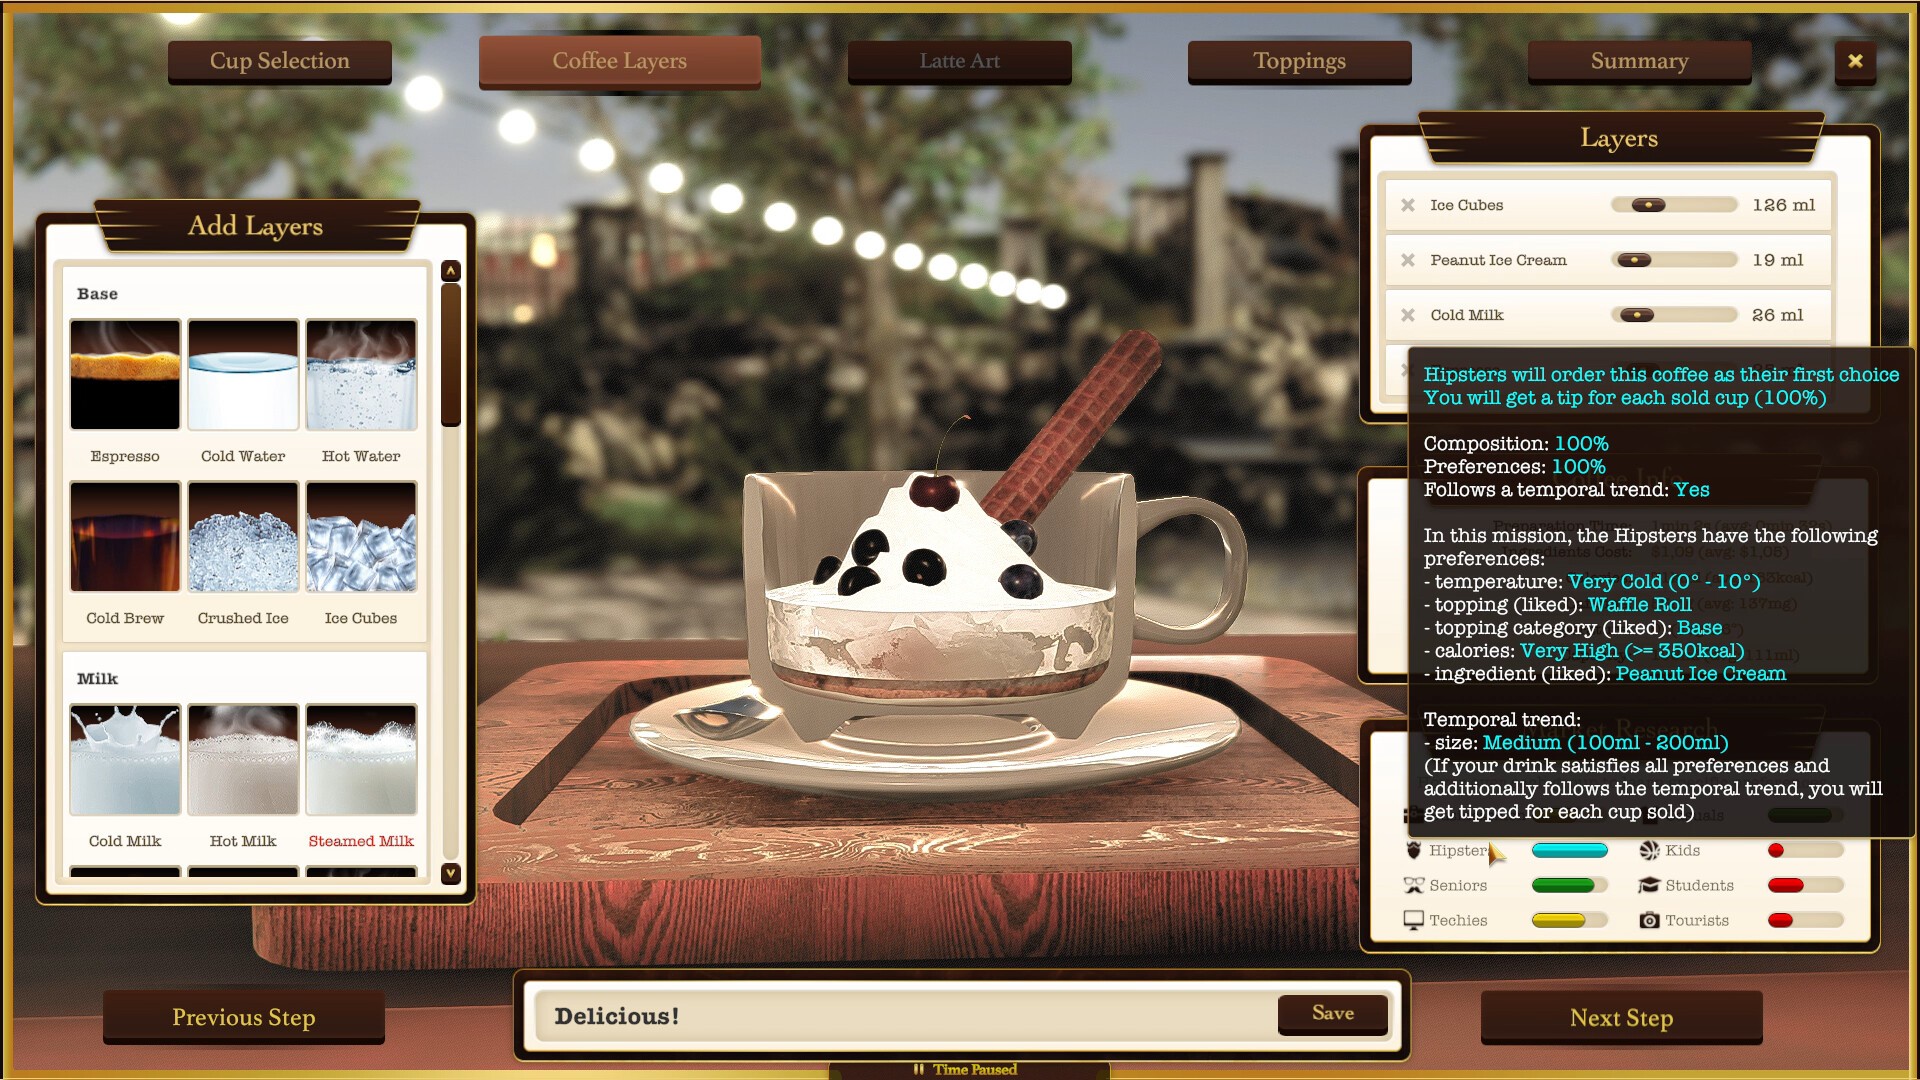 DreamWay Games Releases New Tycoon Game, Espresso Tycoon